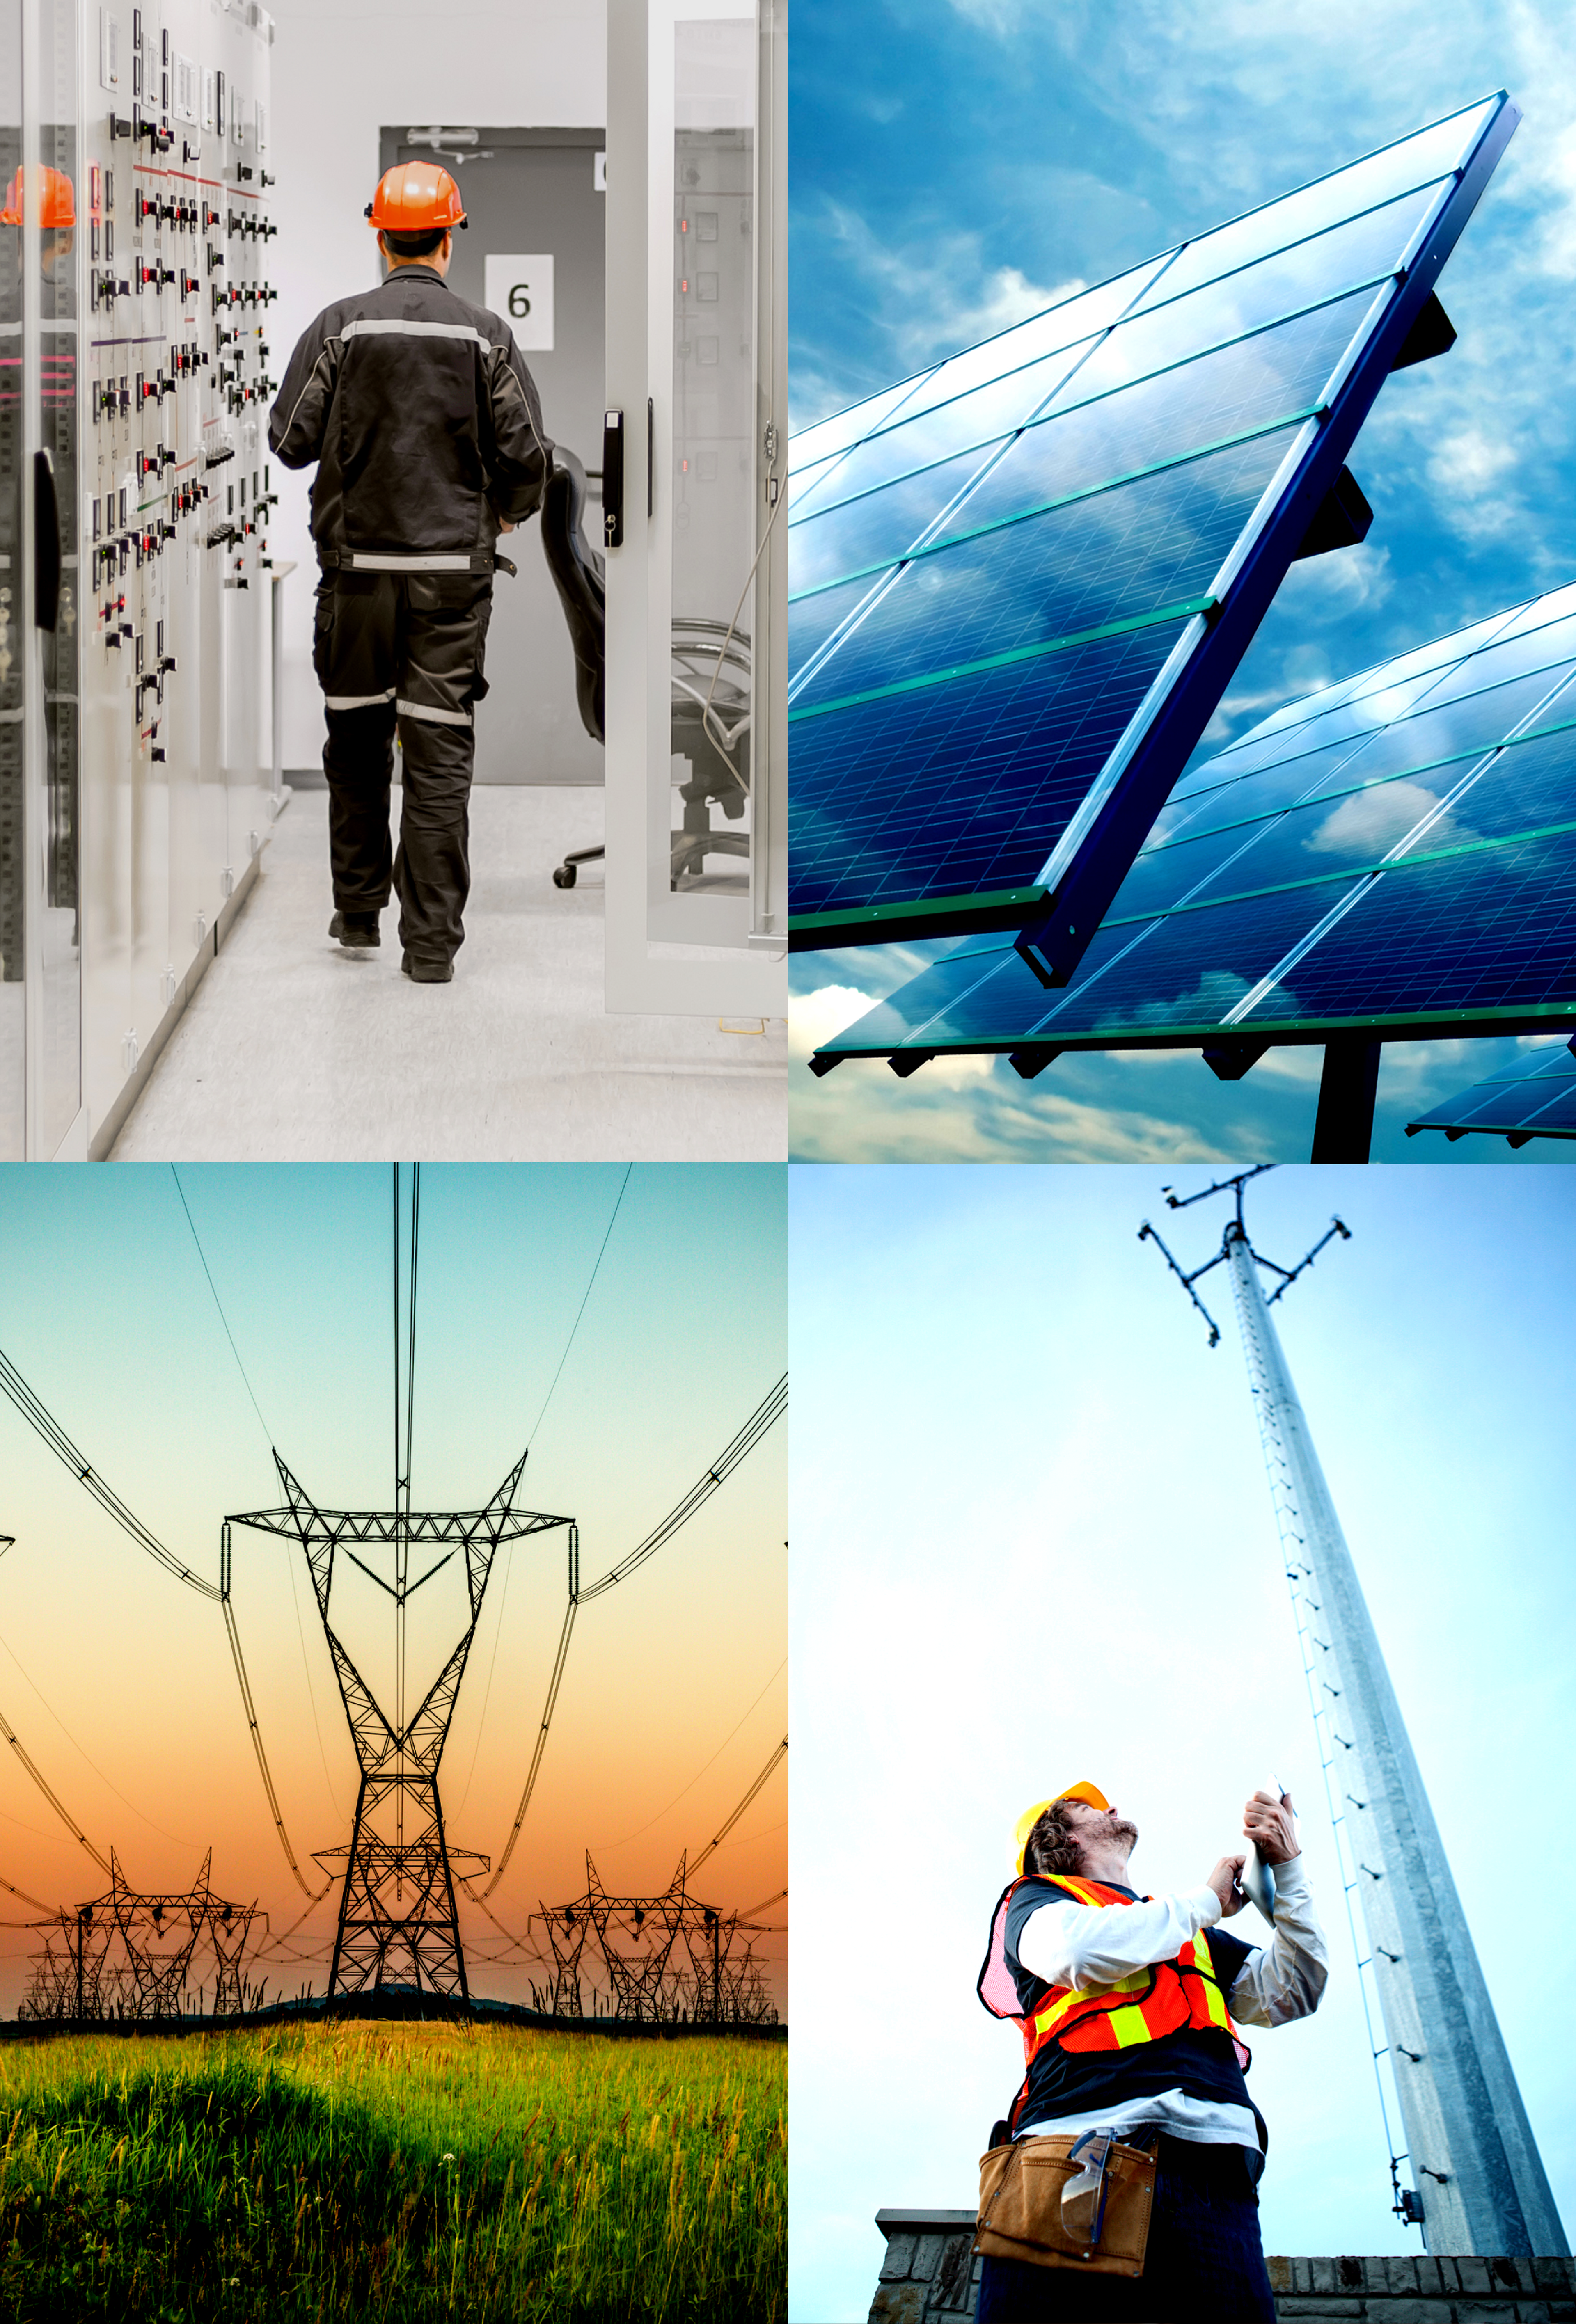 Background image divided into four panels , panel one shows an electrician  wearing an orange helmet, second panel shows a blue solar panel, third panel shows a power tower, fourth panel shows blonde man wearing yellow hard hat l holding a clipart, looking up to inspect an electric tower